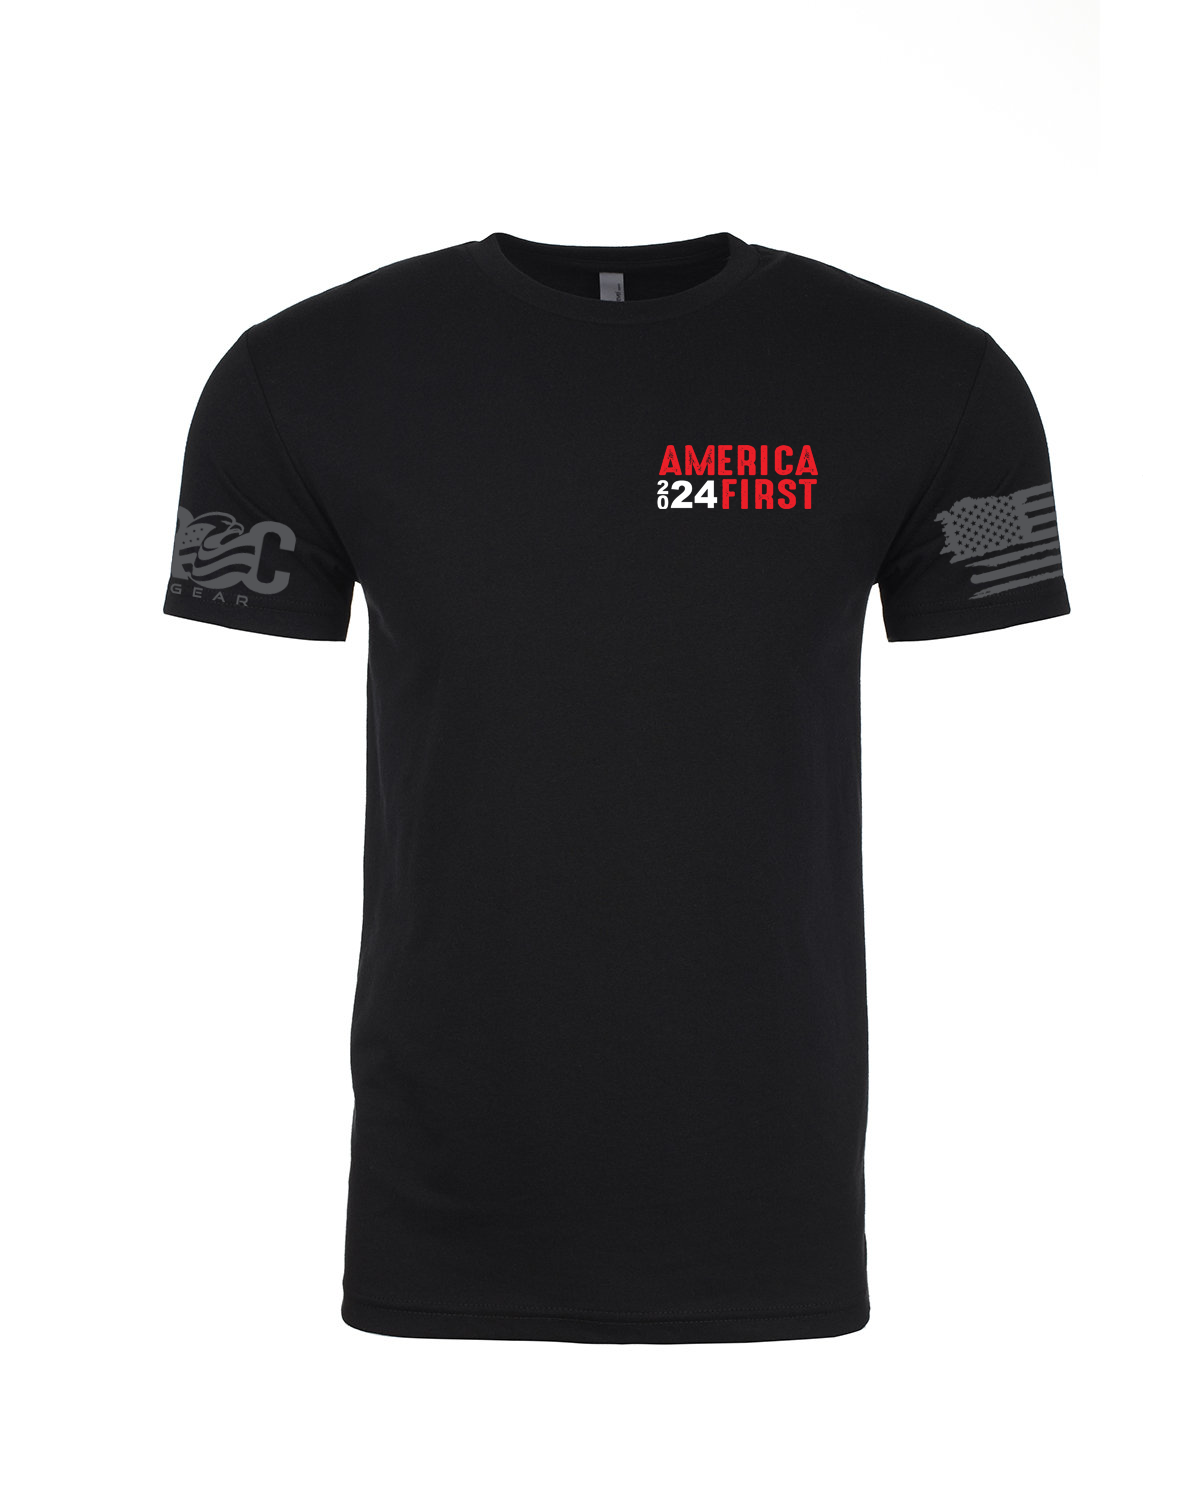 America First 2024 Soft Style tee shirt